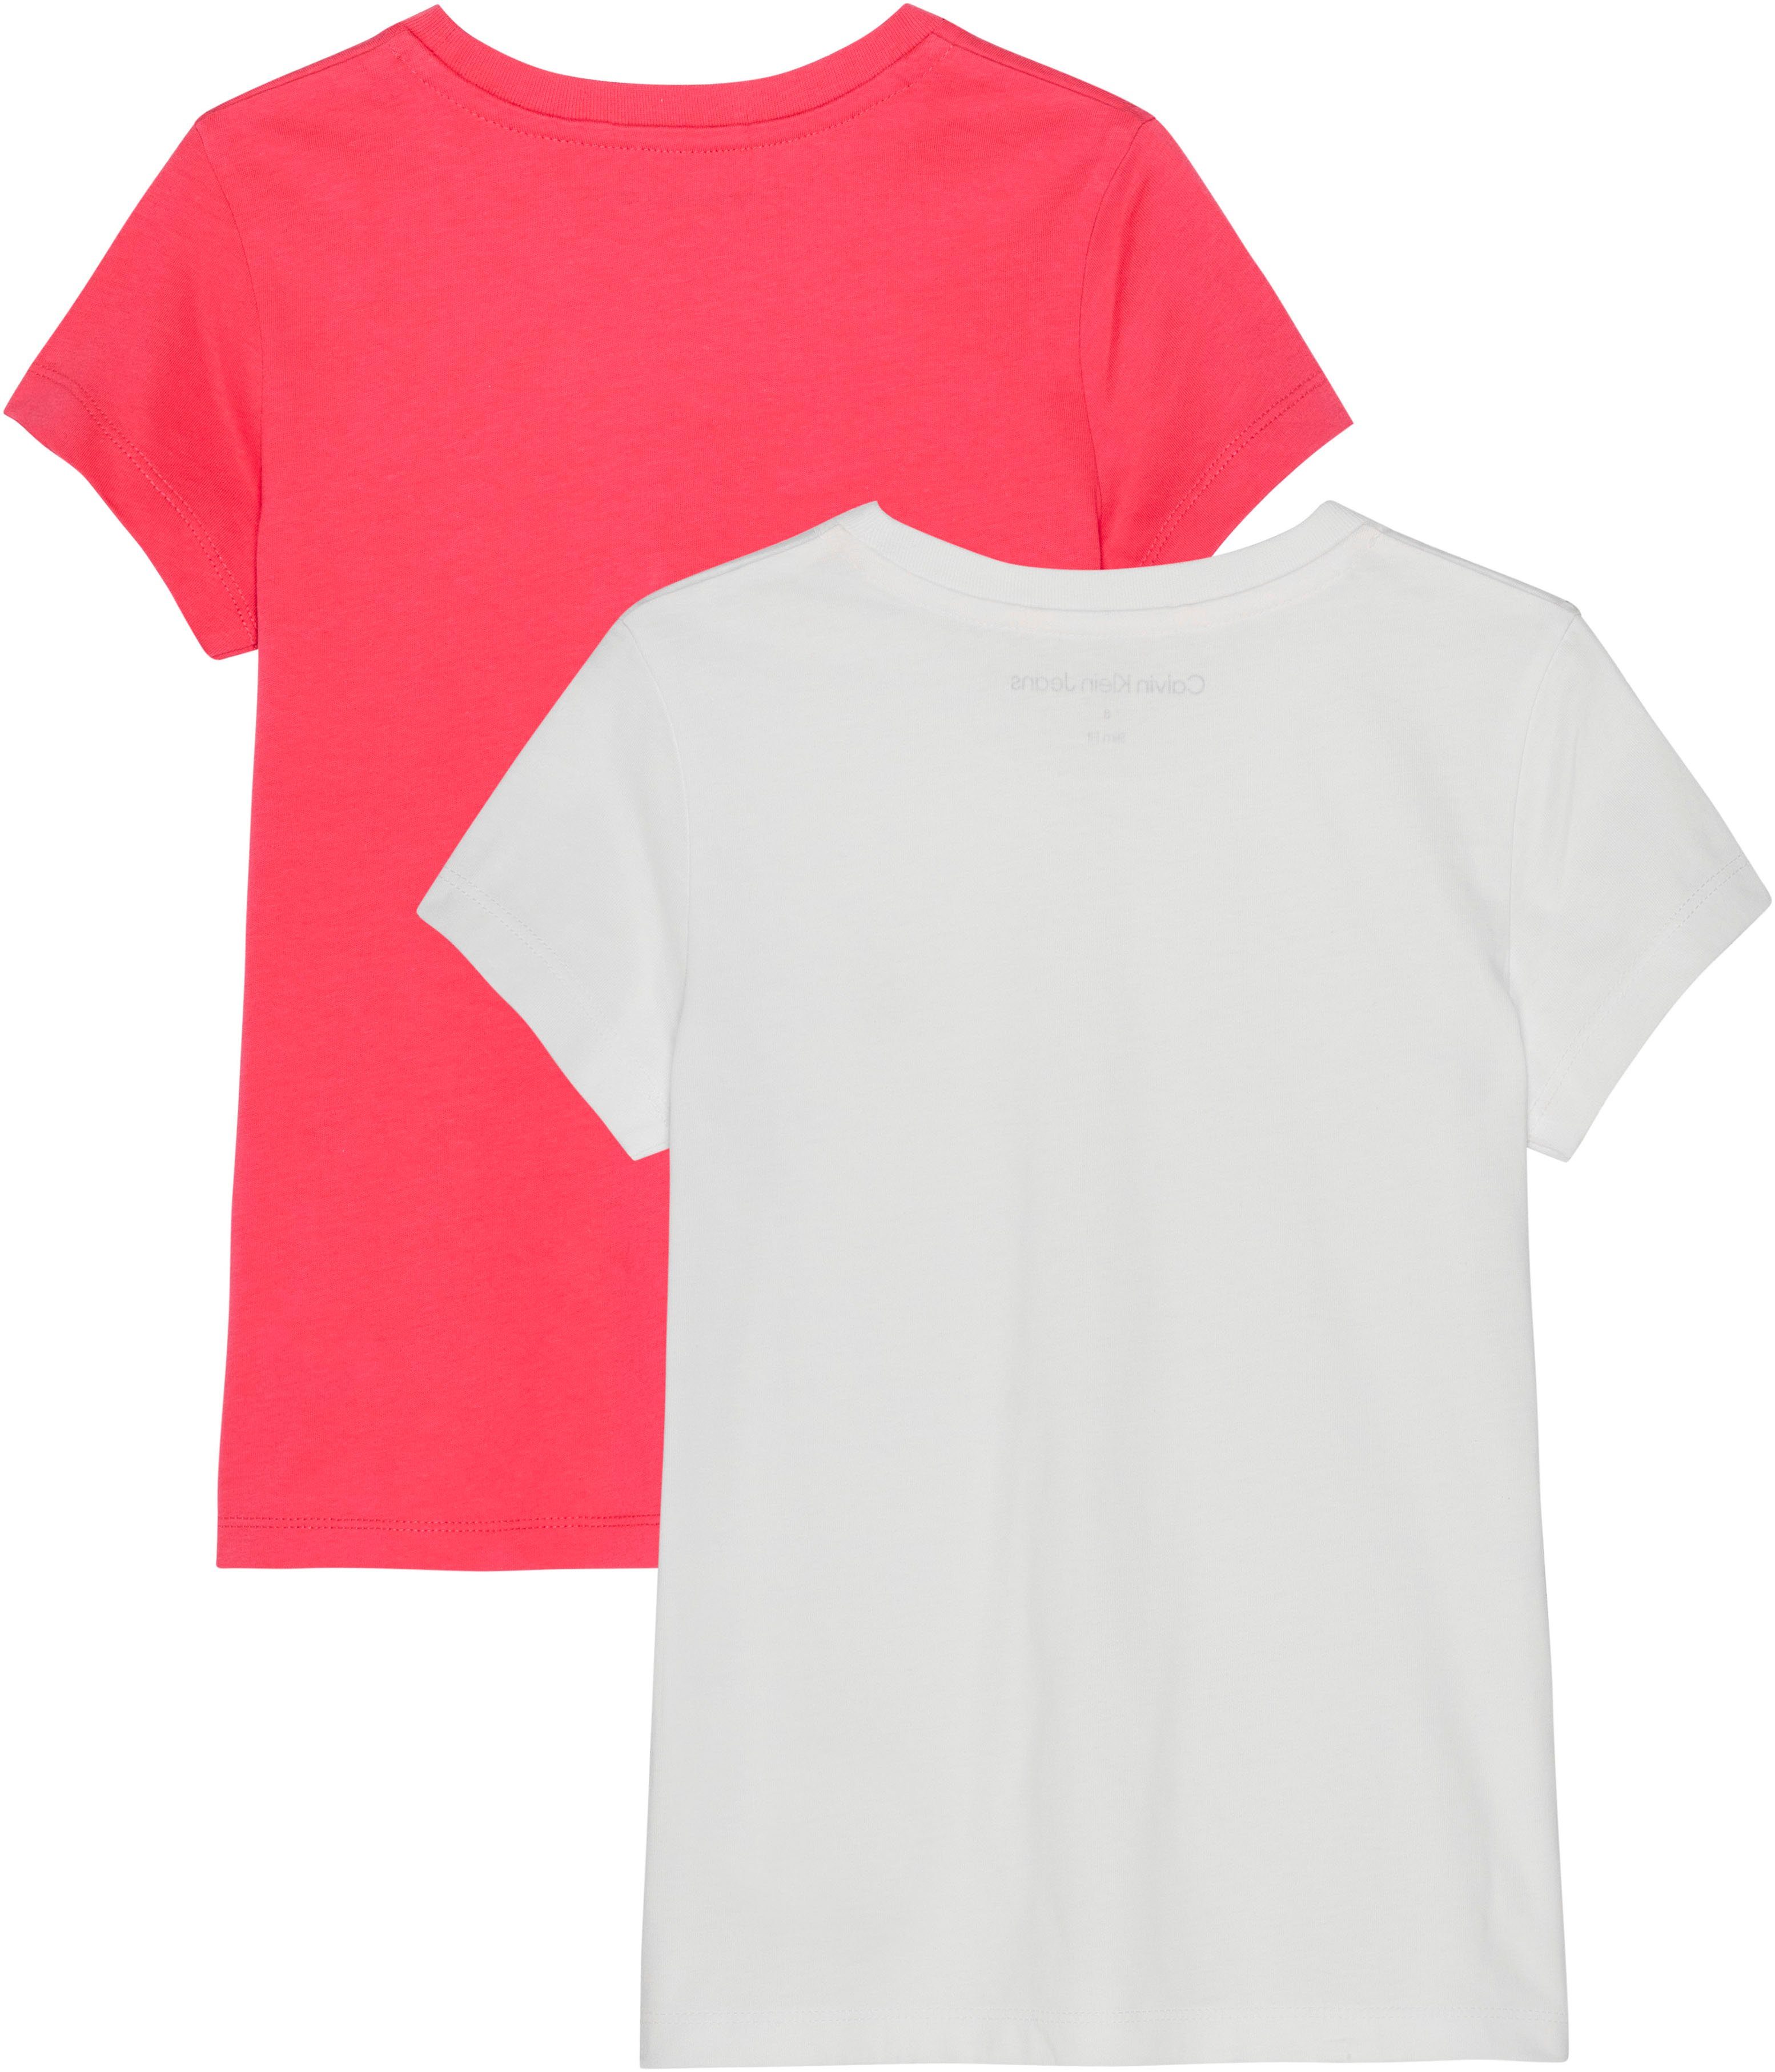 Calvin Klein SLIM White 2-PACK Jeans TOP T-Shirt Teaberry Bright 2-tlg) (Packung, MONOGRAM 